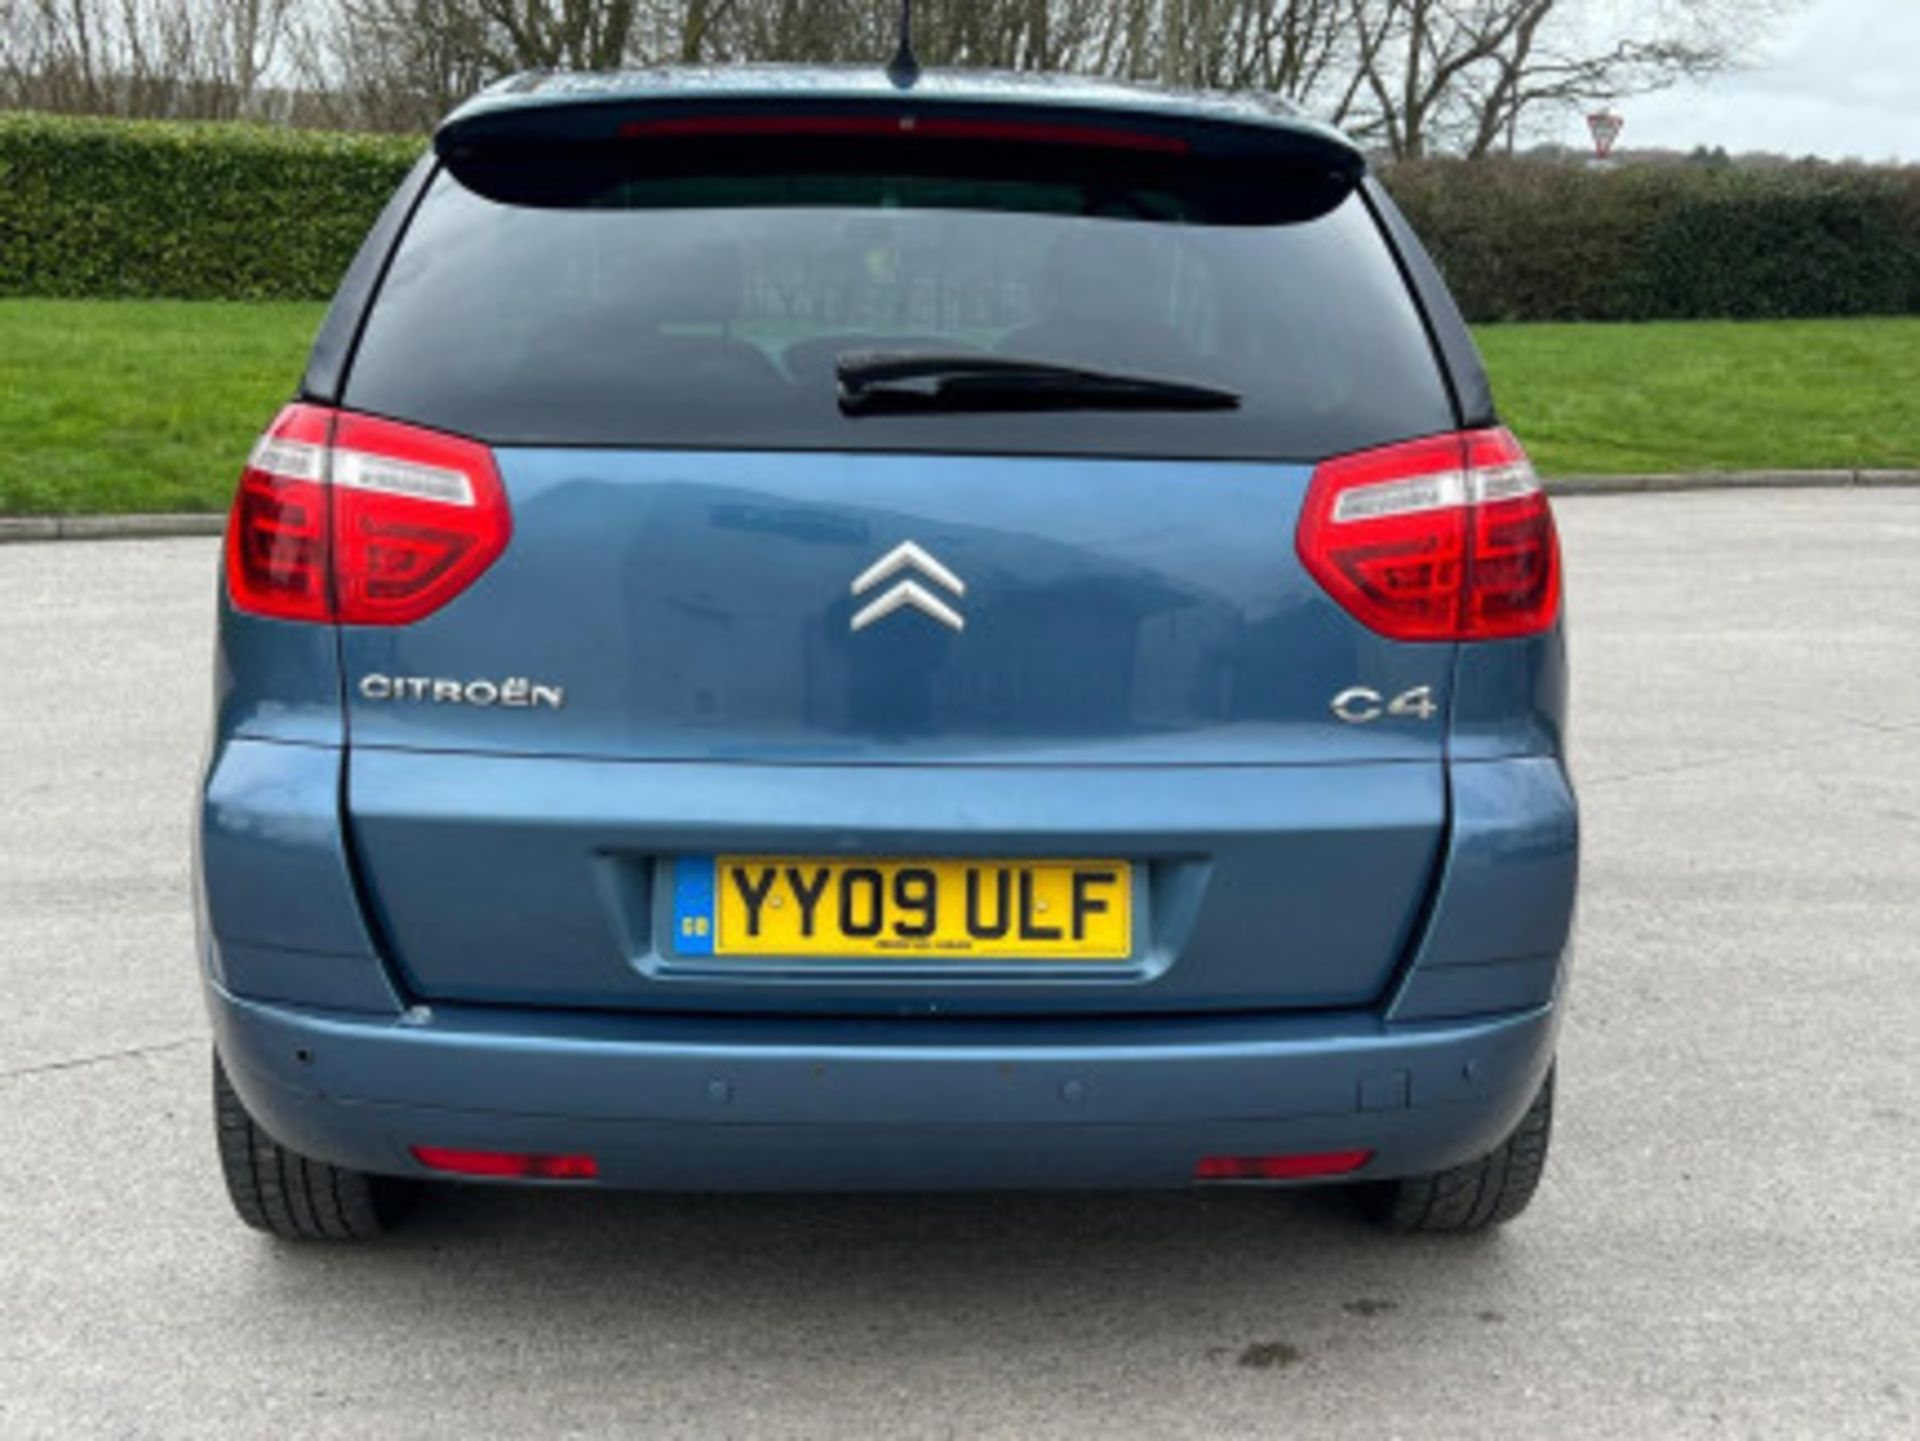 2009 CITROEN C4 PICASSO 1.6 HDI VTR+ EGS6 5DR >>--NO VAT ON HAMMER--<< - Image 46 of 123